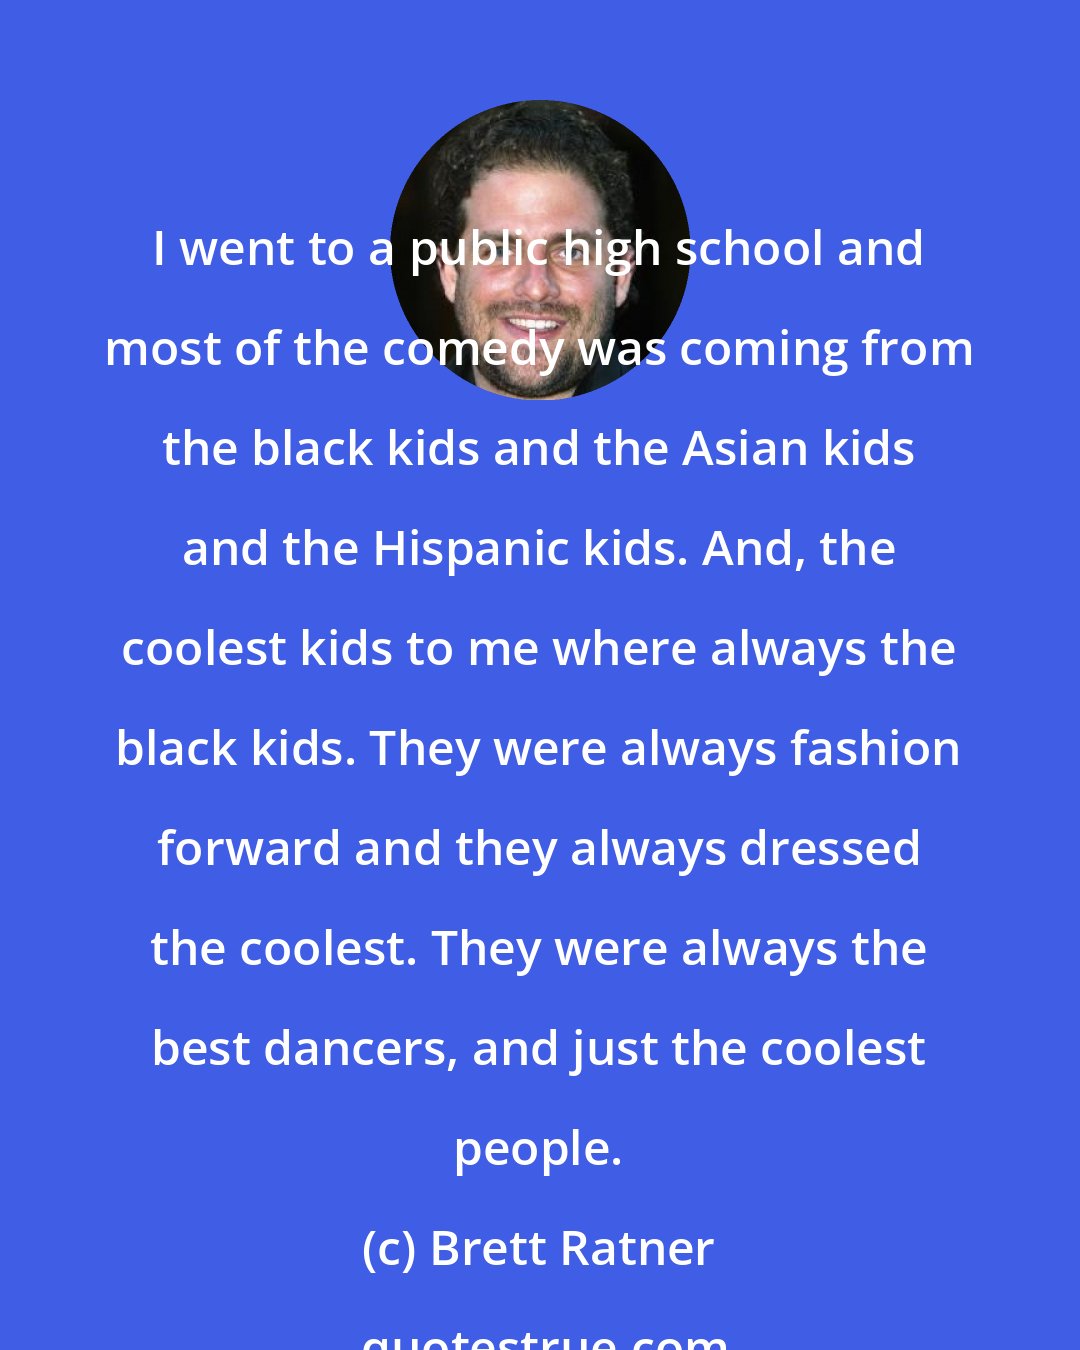 Brett Ratner: I went to a public high school and most of the comedy was coming from the black kids and the Asian kids and the Hispanic kids. And, the coolest kids to me where always the black kids. They were always fashion forward and they always dressed the coolest. They were always the best dancers, and just the coolest people.